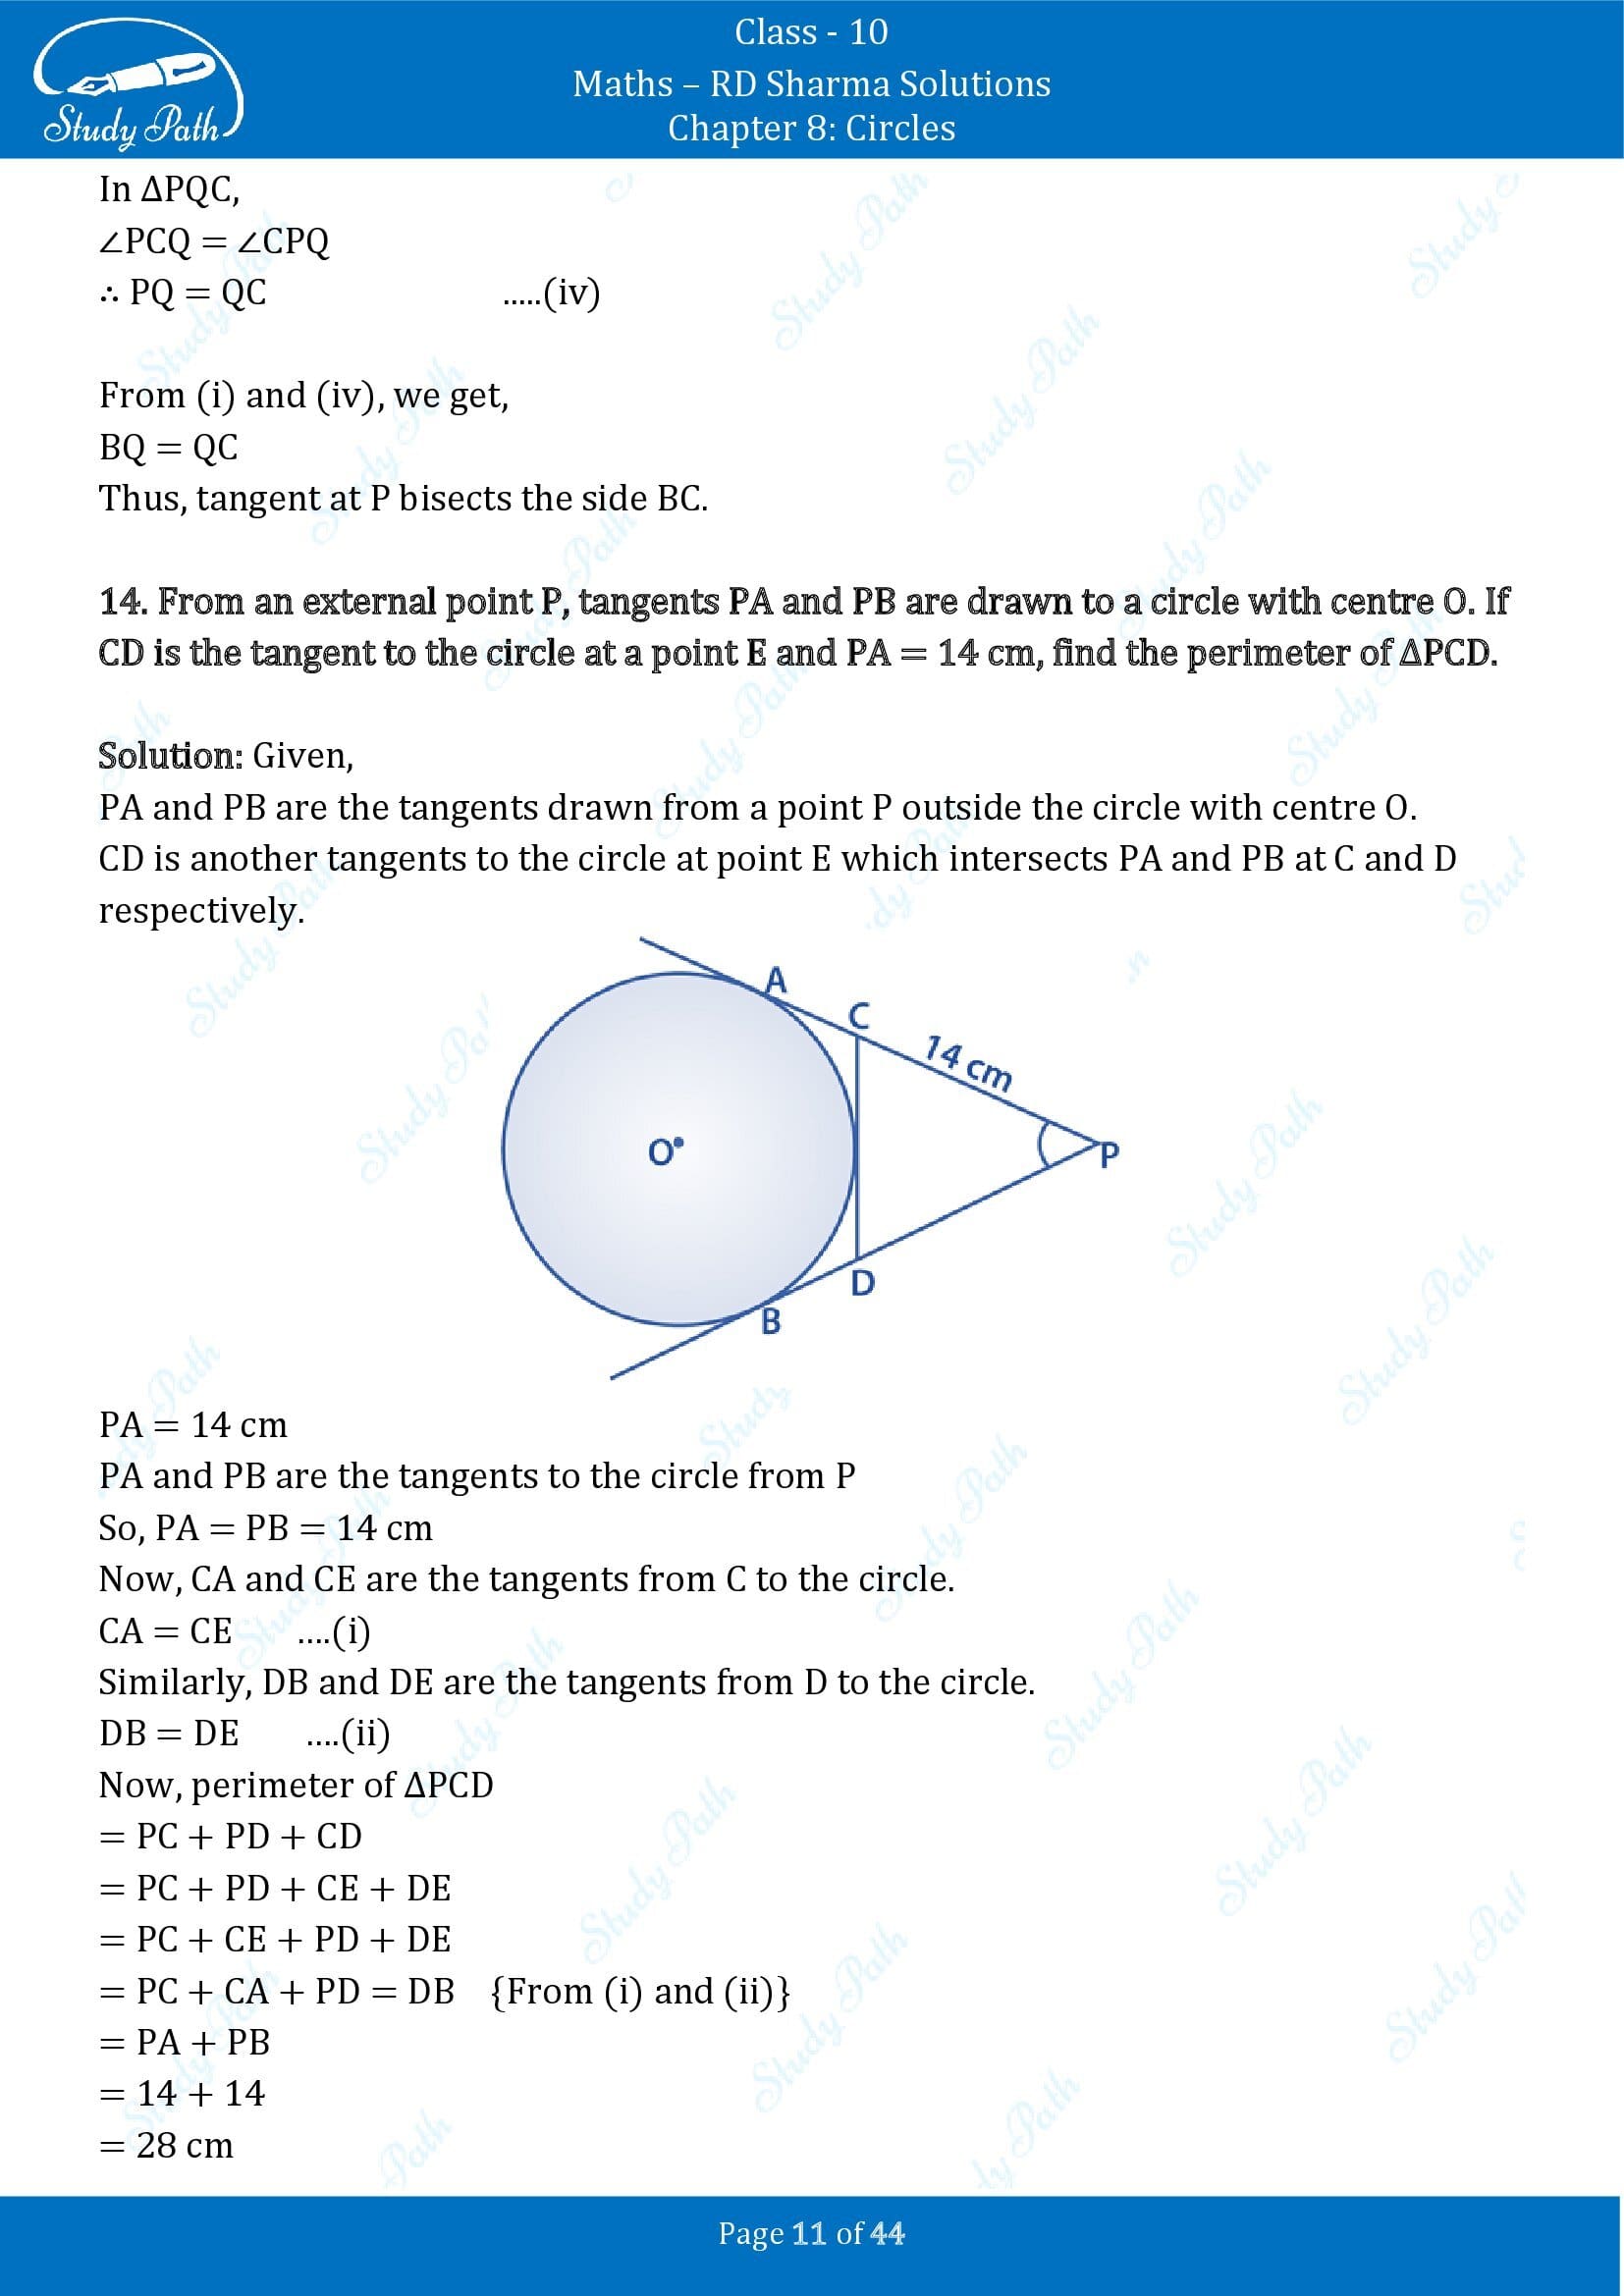 RD Sharma Solutions Class 10 Chapter 8 Circles Exercise 8.2 00011